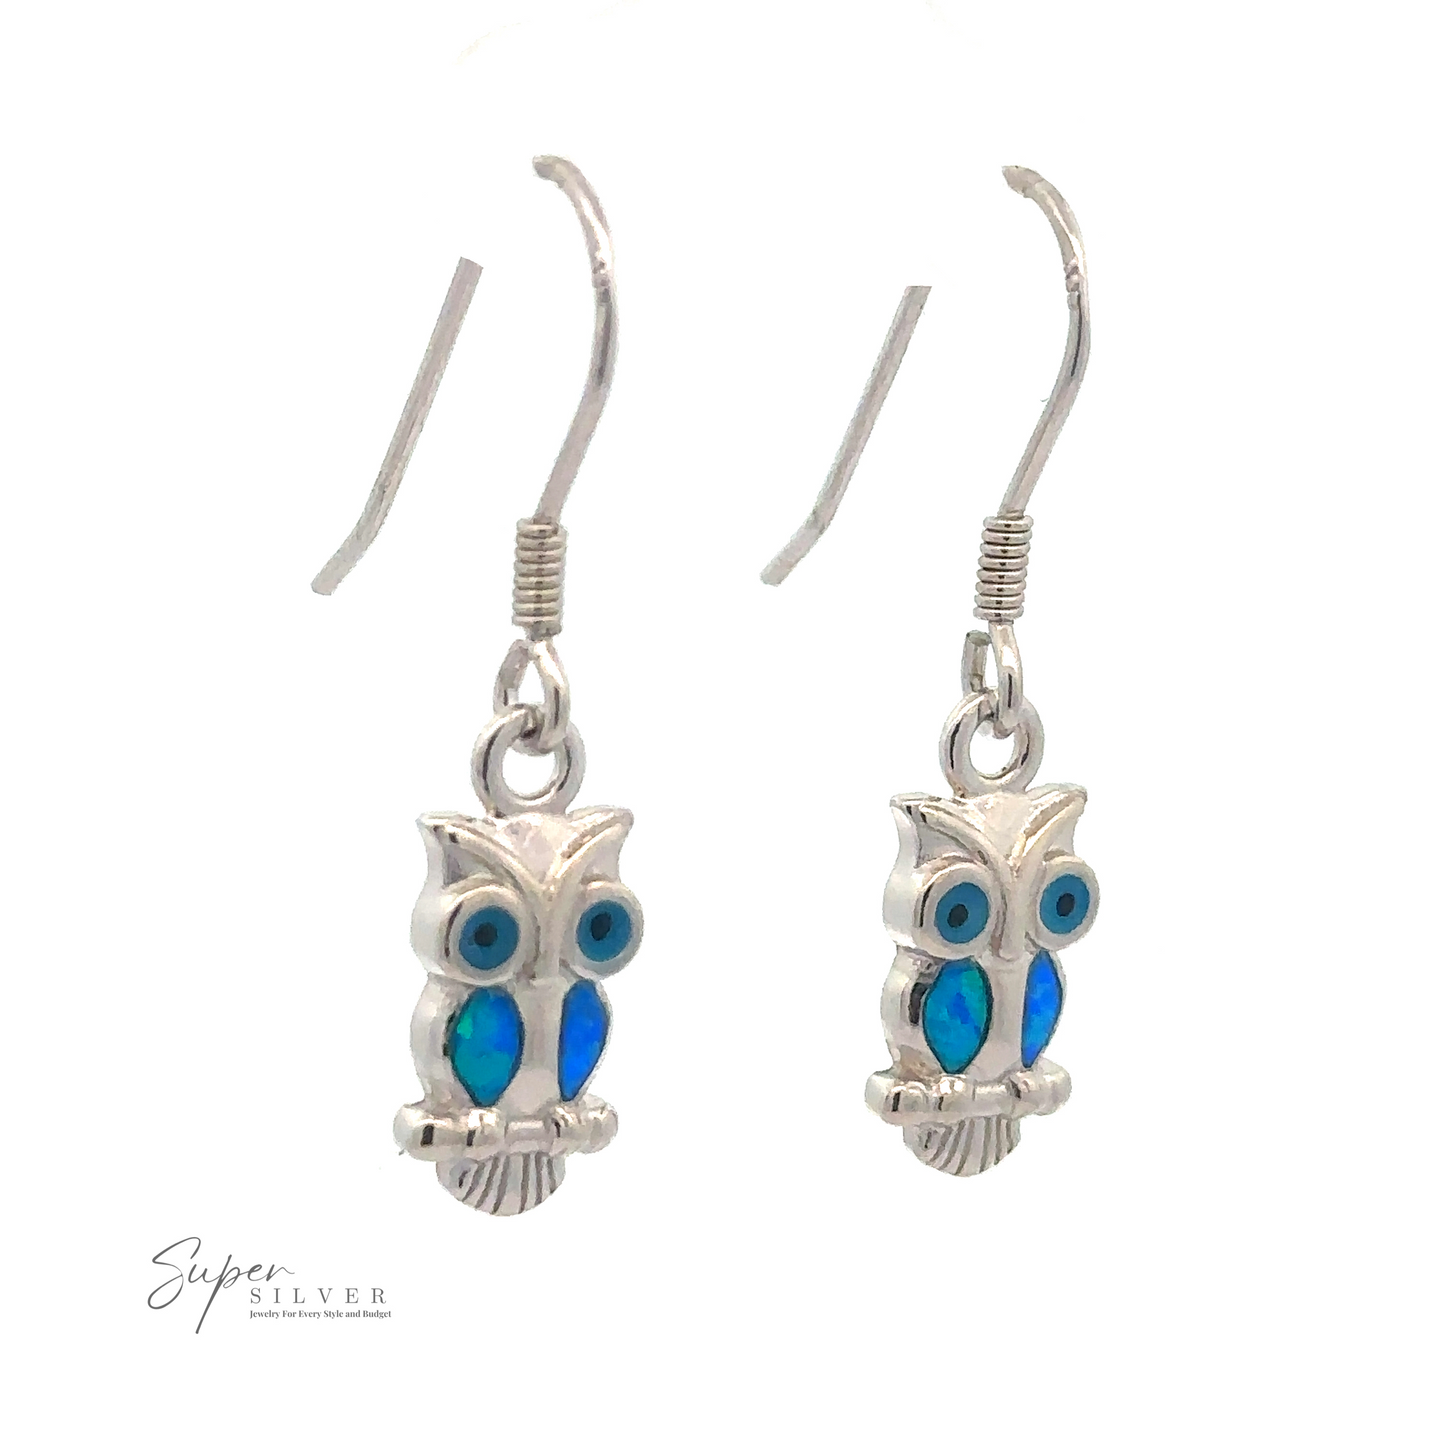 
                  
                    A pair of Lab-Created Opal Owl Earrings with blue accents hanging from hooks. The logo "Super Silver" is visible in the bottom left corner, showcasing this creative jewelry piece.
                  
                